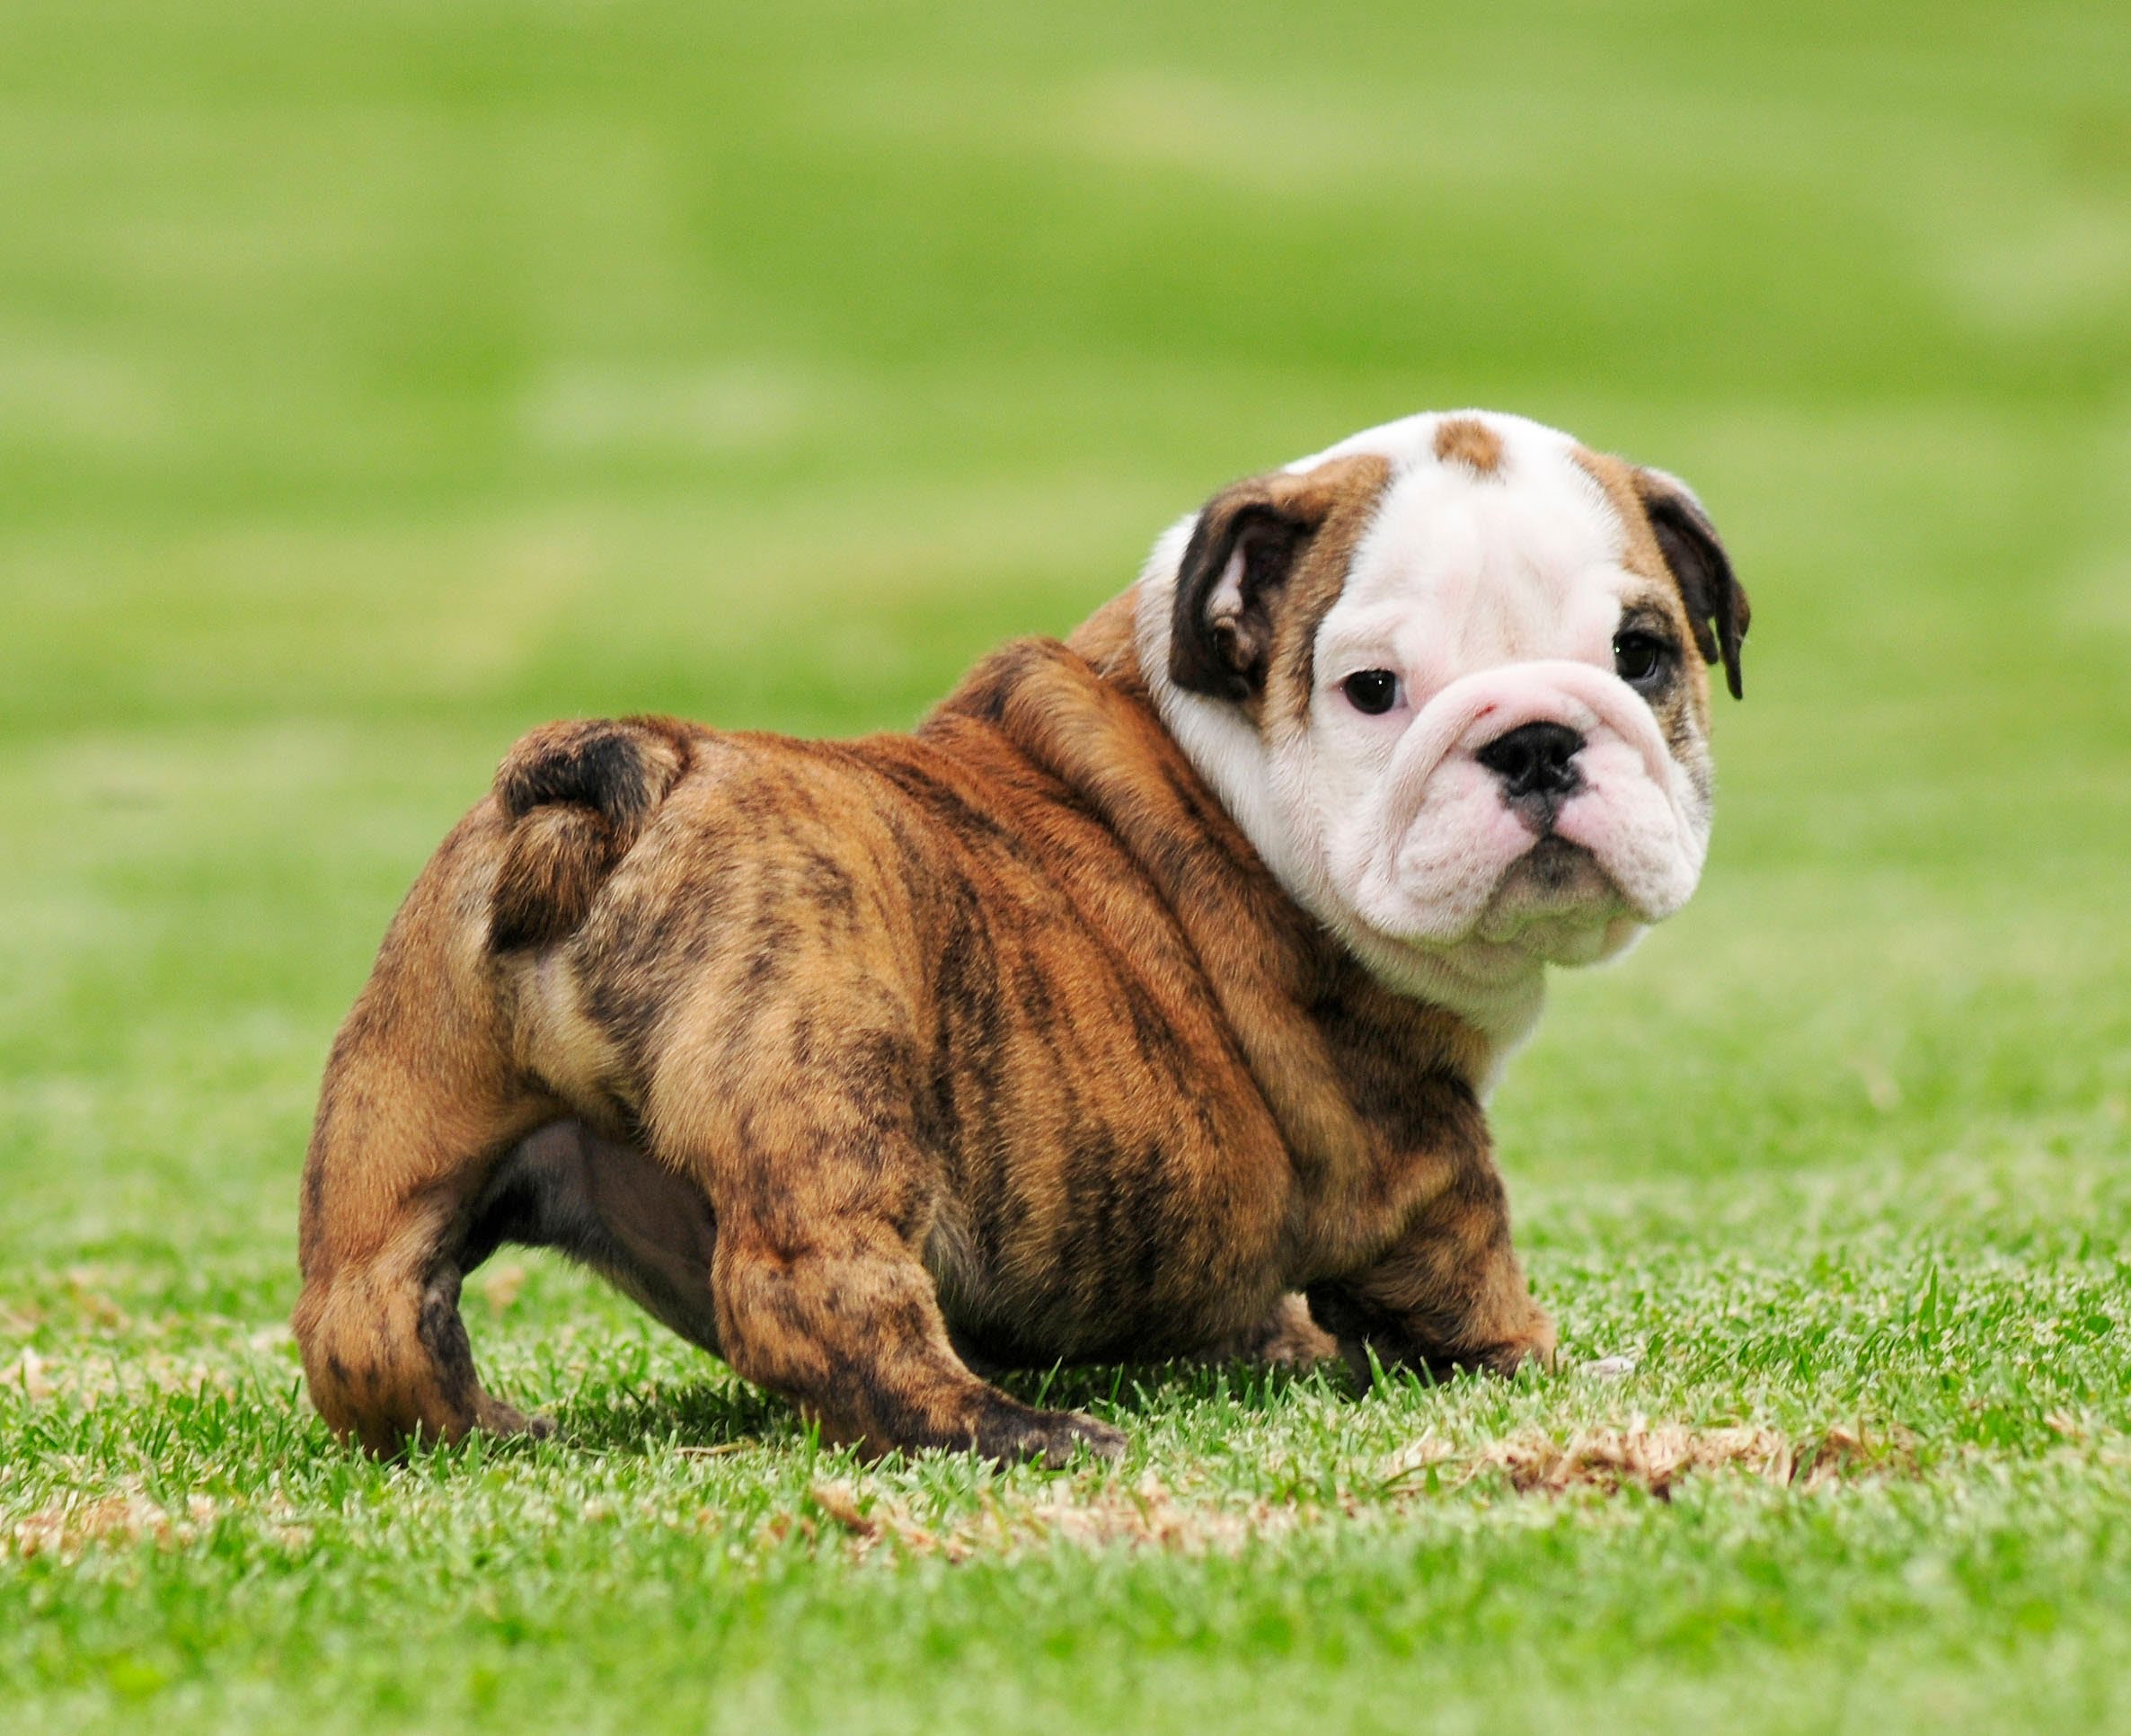 25 Beautiful Bulldog Puppies That Will Melt Your Heart - Inside Dogs ...